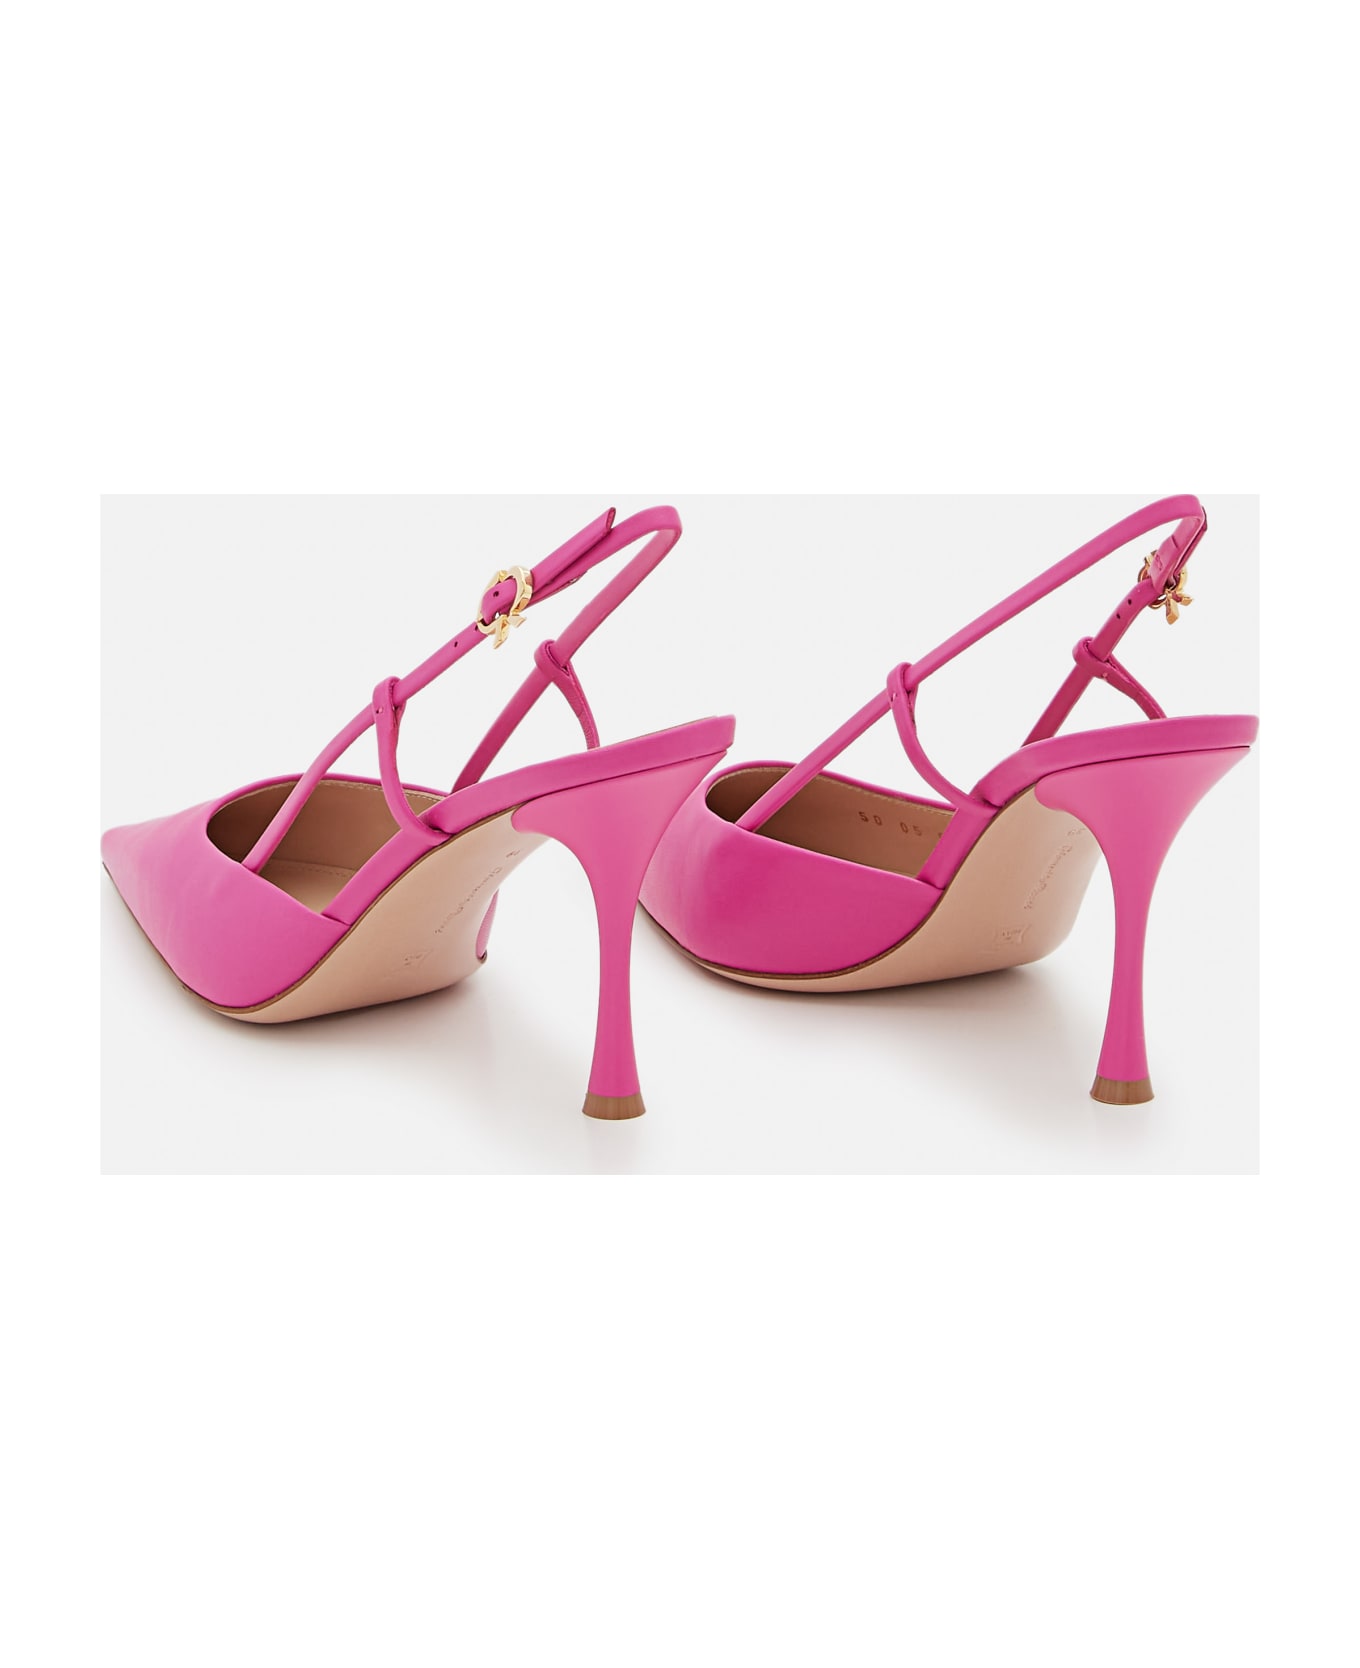 Gianvito Rossi 85mm Ascent Leather Pumps - Pink